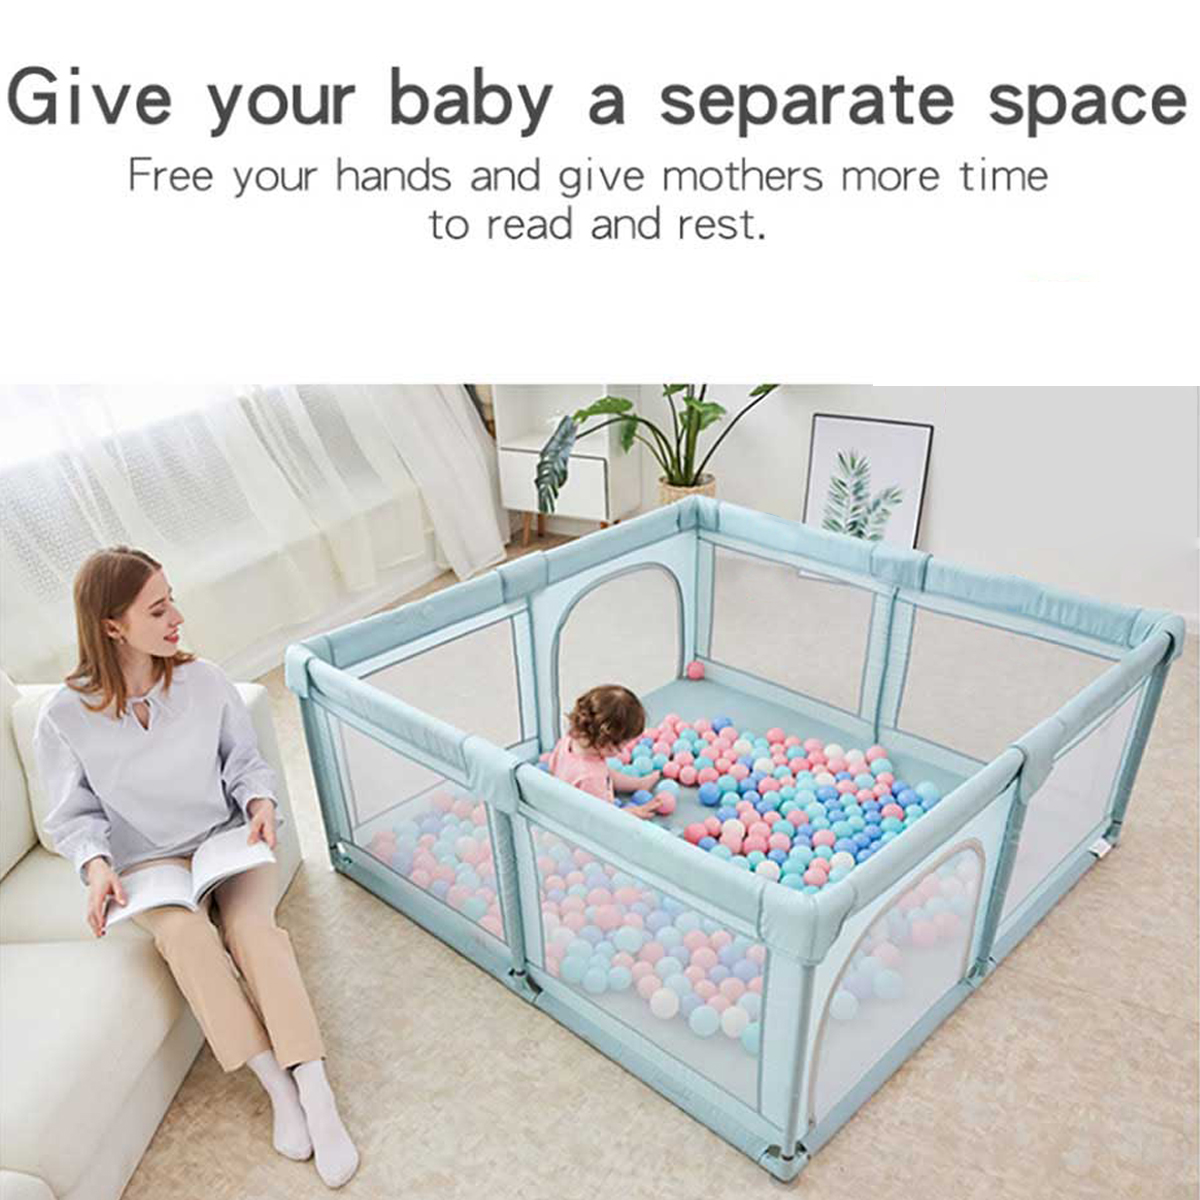 Baby-Playpen-Interactive-Safety-Indoor-Gate-Play-Yards-Tent-Court-Foldable-Portable-Kids-Furniture-f-1878434-2